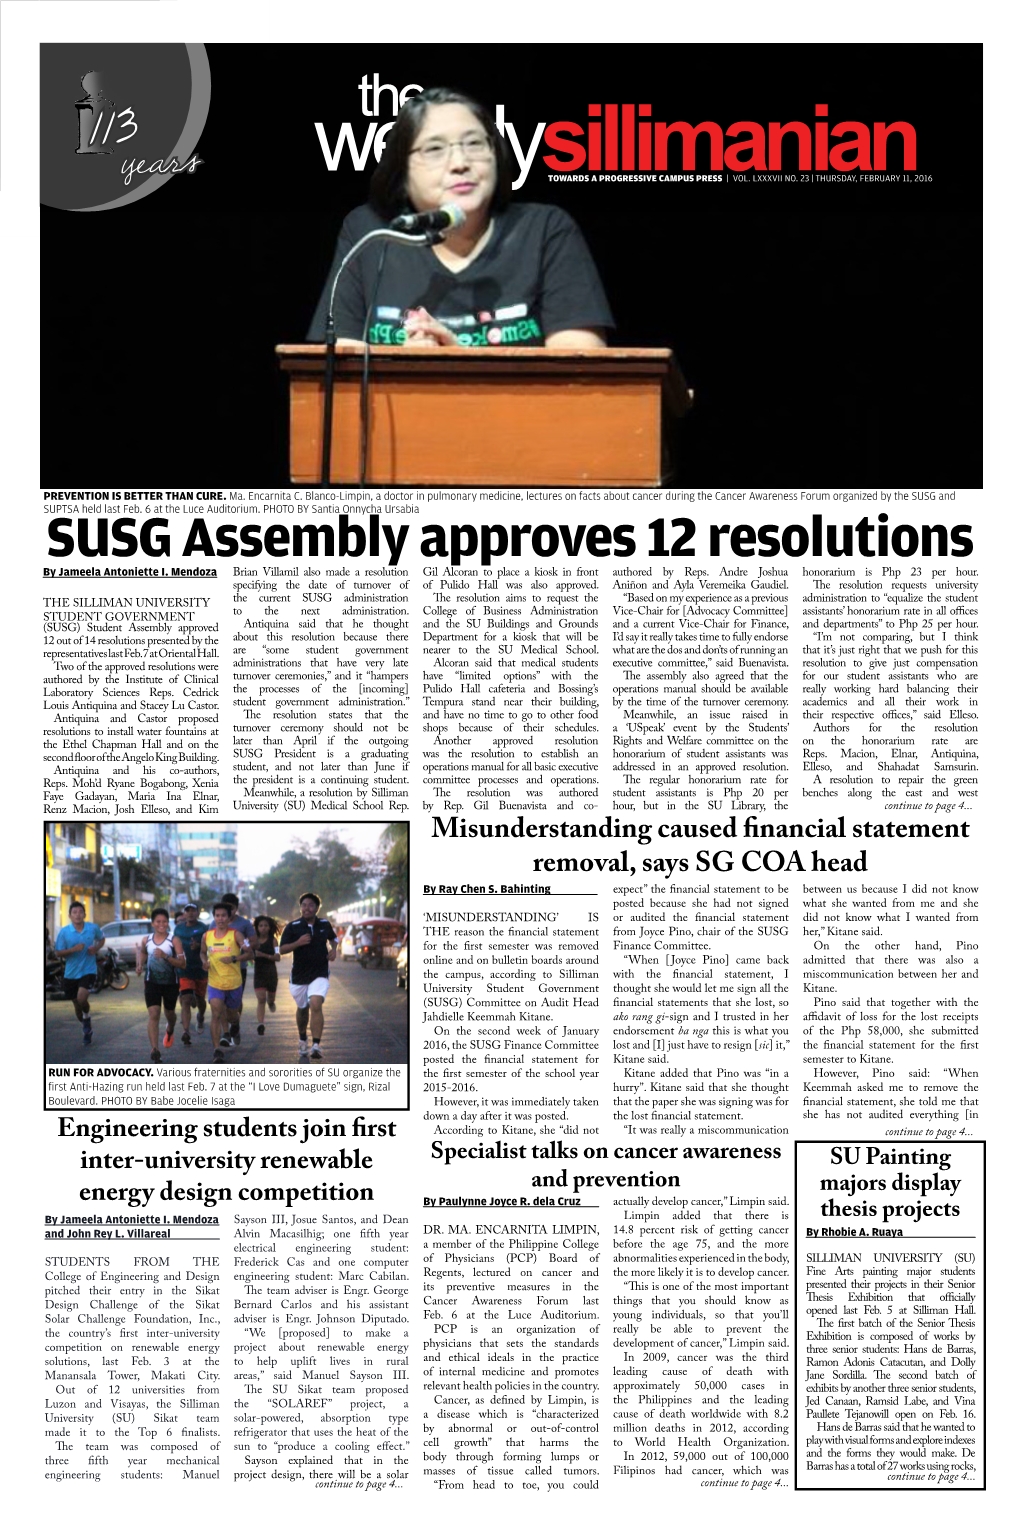 SUSG Assembly Approves 12 Resolutions by Jameela Antoniette I